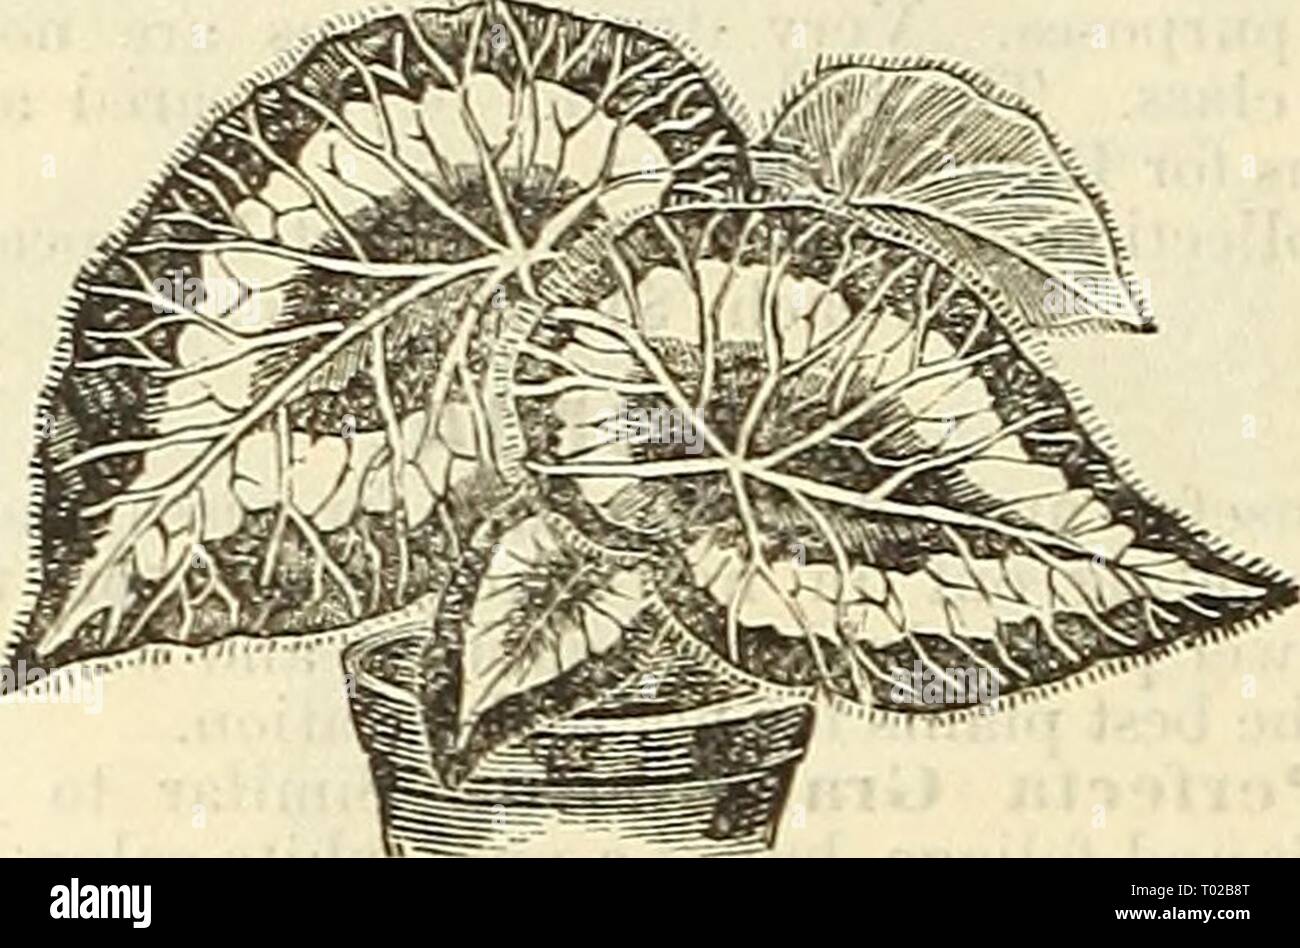 Dreer's garden calendar for 1887 . dreersgardencale1887henr Year: 1887  72 DREER'S GARDEN CALENDAR. BEGONIA REX. (Ornamental Leaved.) We offer fifteen of the most distinct and handsomely marked varieties of this beautiful class of Begonias. These are grown for their variegated foliage, and are very desir- able for house and garden decorations, in shady positions, and especially well adapted for baskets, vases, etc. 25 cts. each ; $2.50 per doz.    Begonia Rhx. BOUVARDIA. Shrubby plants with corymbs of white, rose, crimson and scarlet flowers, blooming during the autumn and winter. Their dazzli Stock Photo